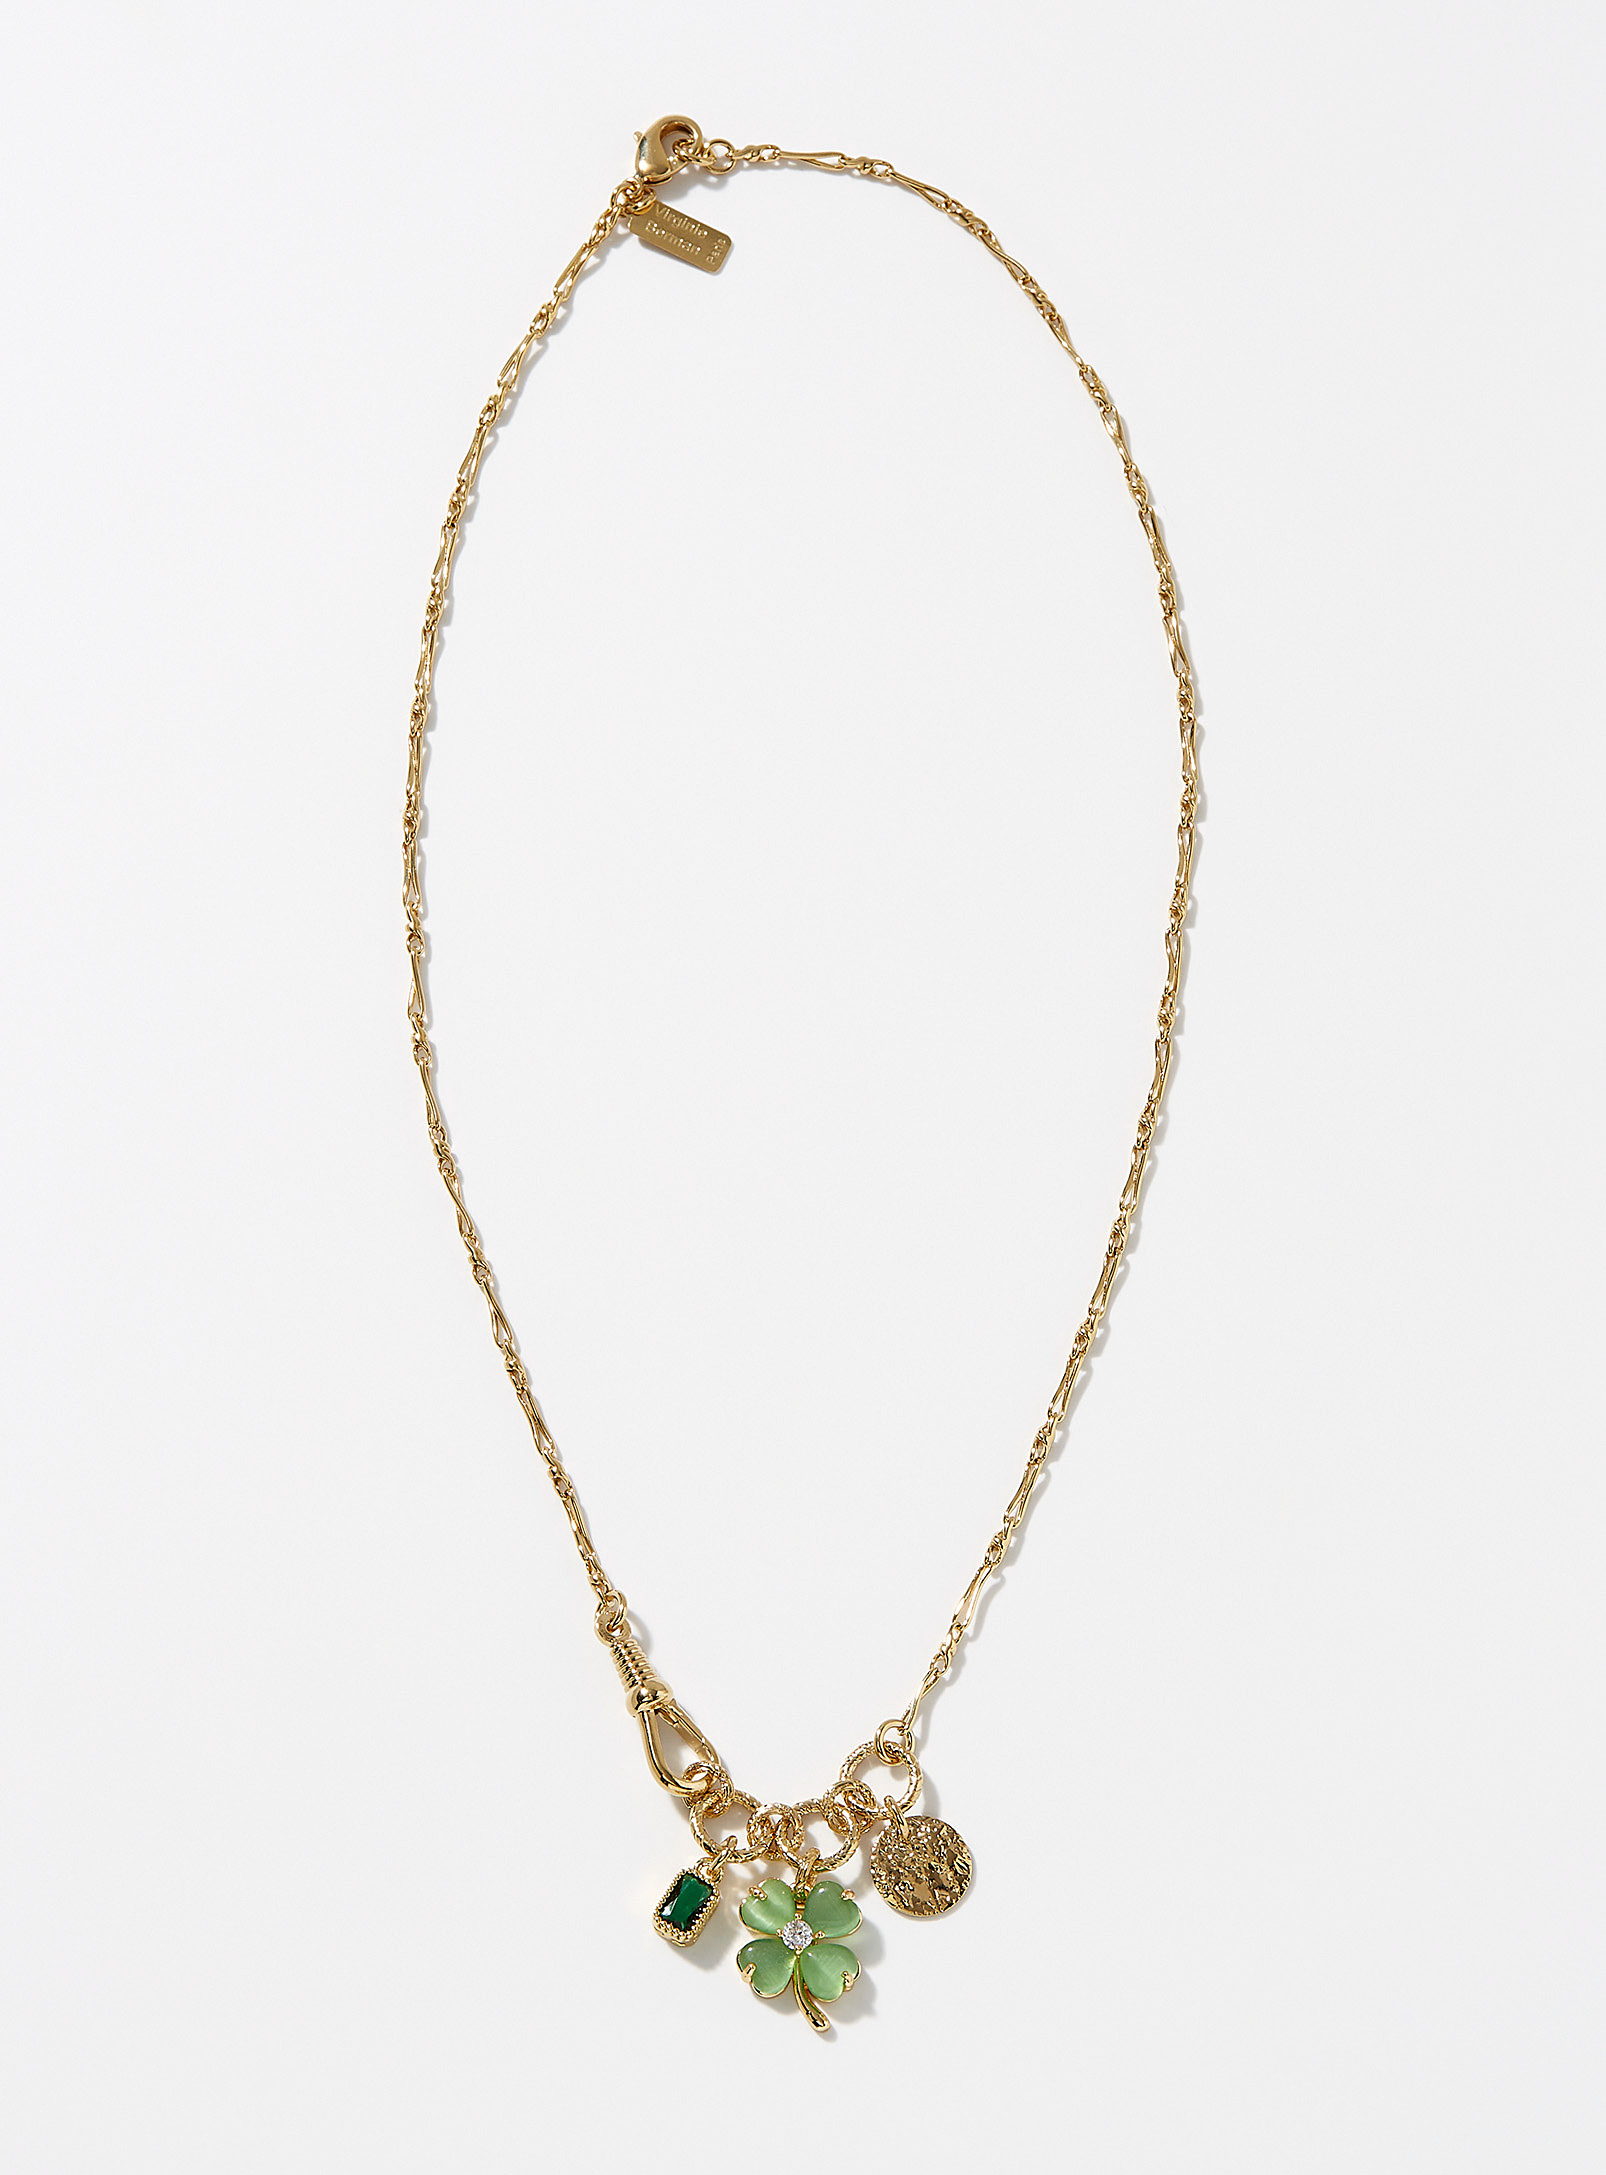 Virginie Berman Clover, Stone, And Medallion Chain In Gold